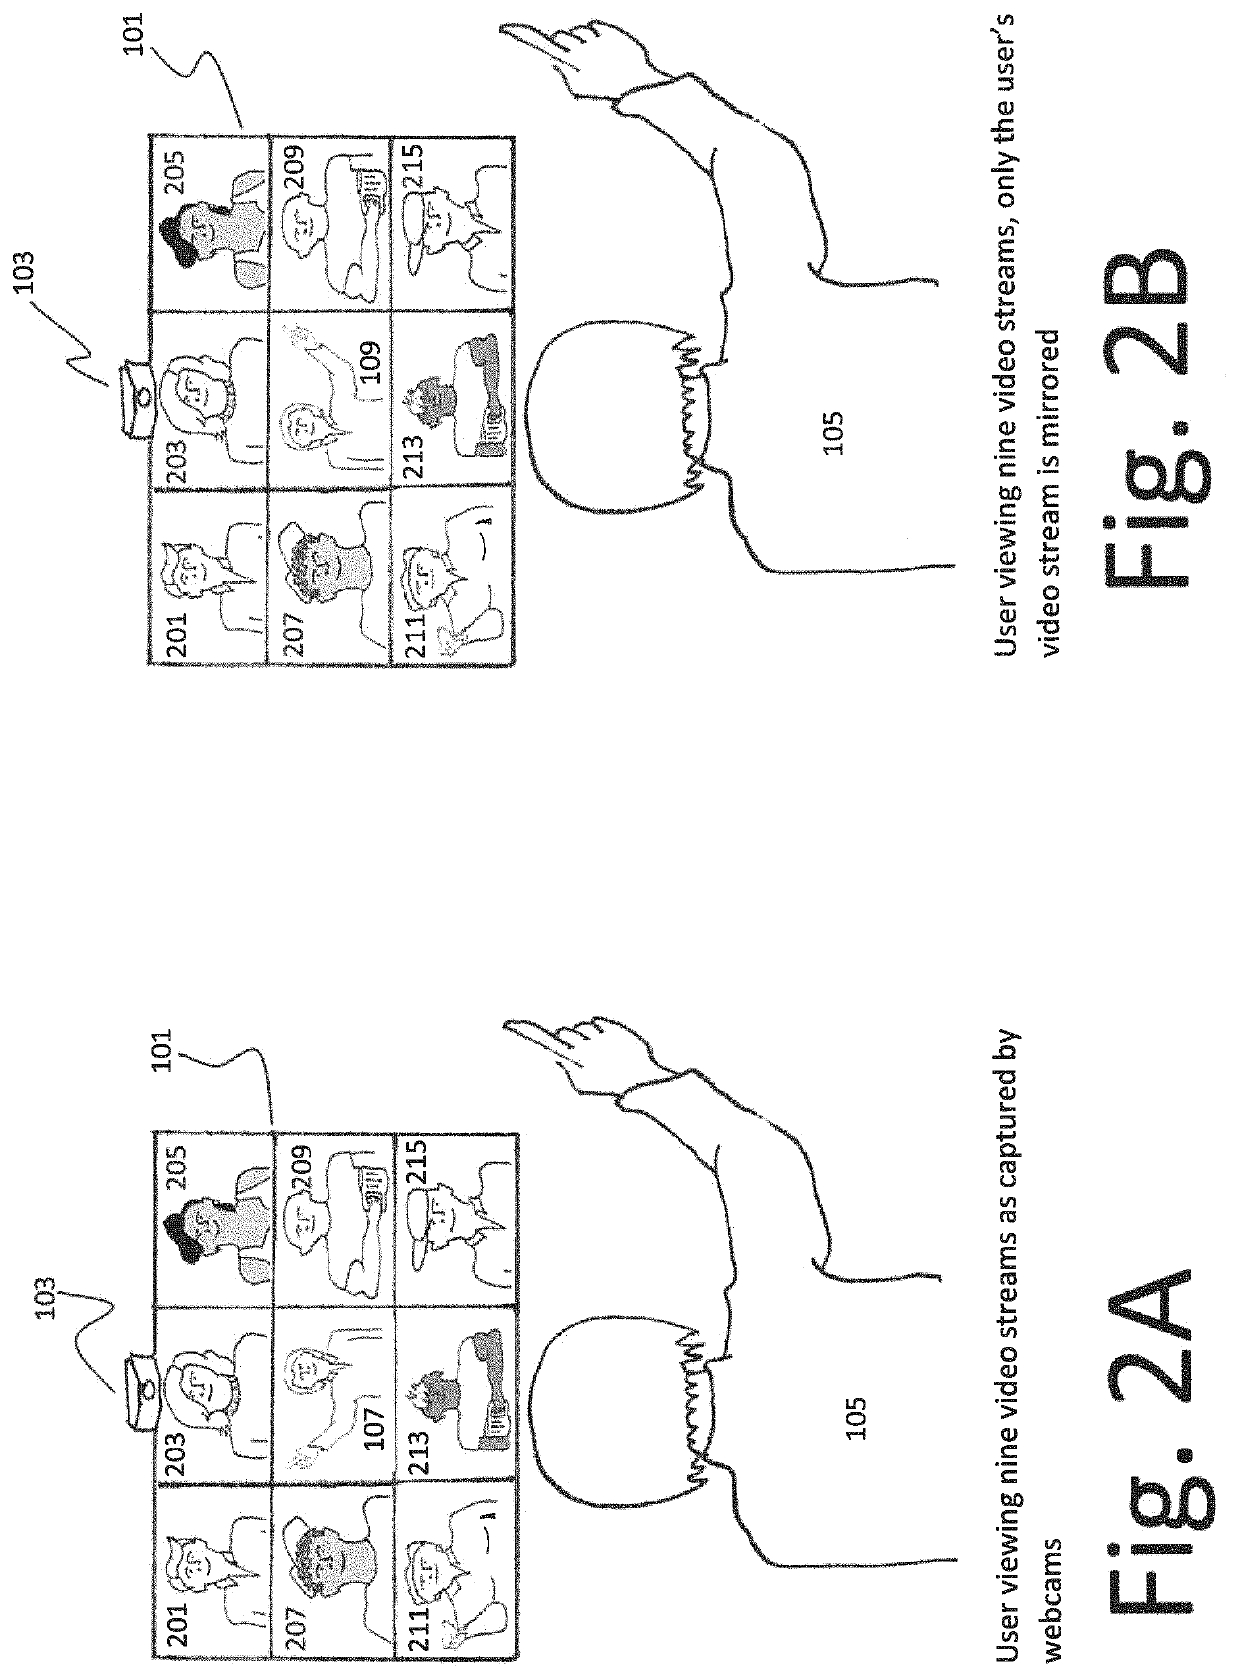 Method and apparatus for repositioning meeting participants within a gallery view in an online meeting user interface based on gestures made by the meeting participants